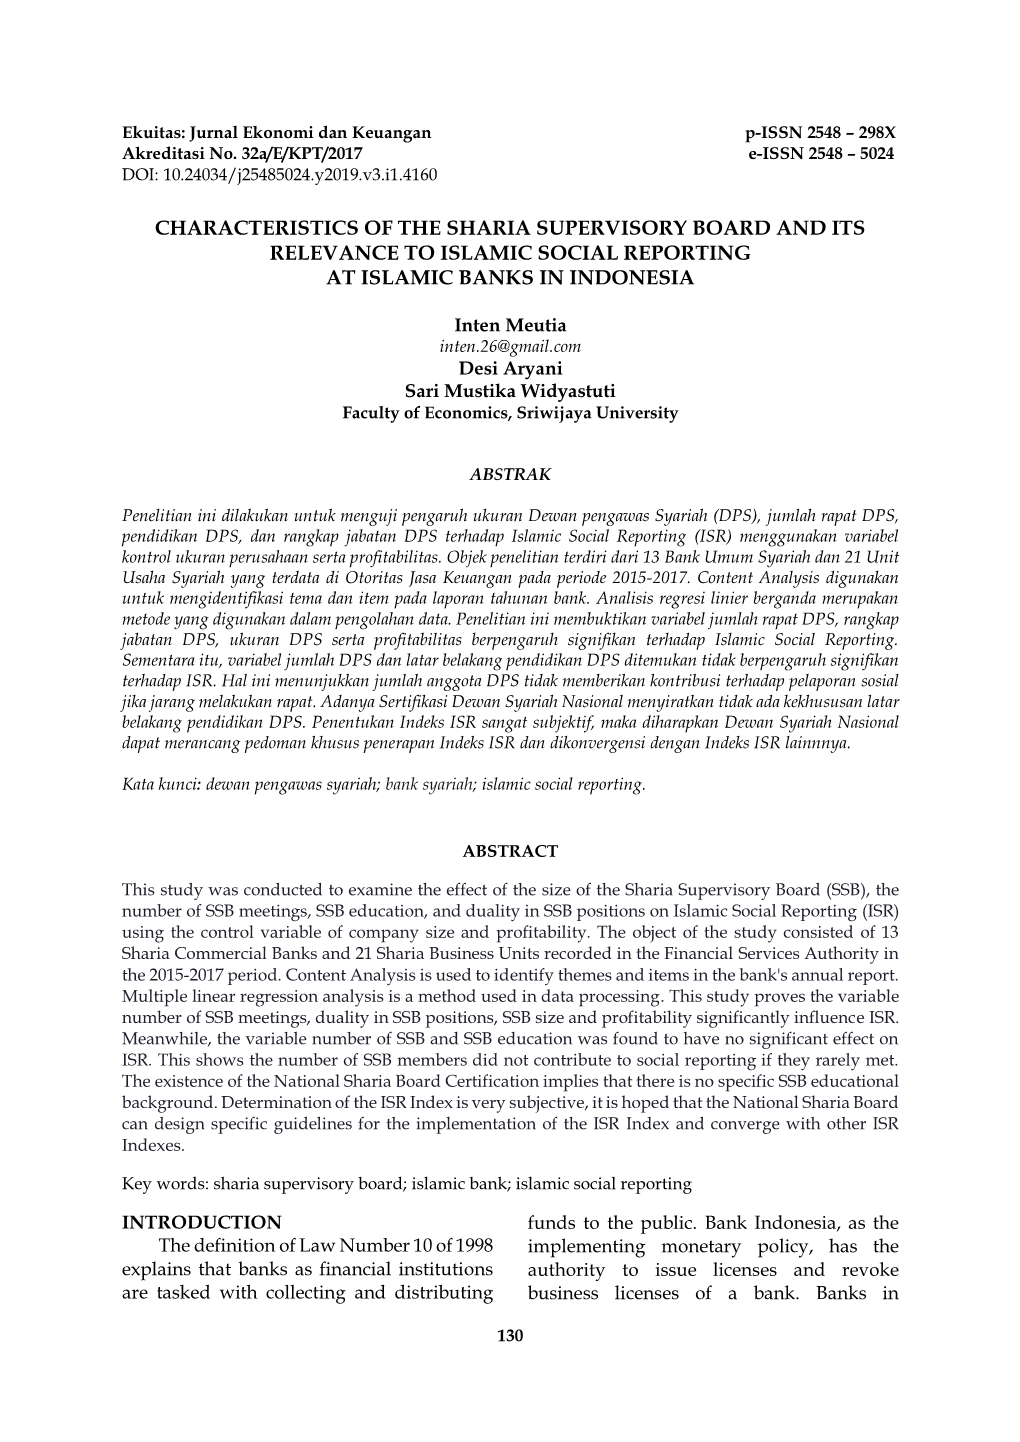 Characteristics of the Sharia Supervisory Board and Its Relevance to Islamic Social Reporting at Islamic Banks in Indonesia